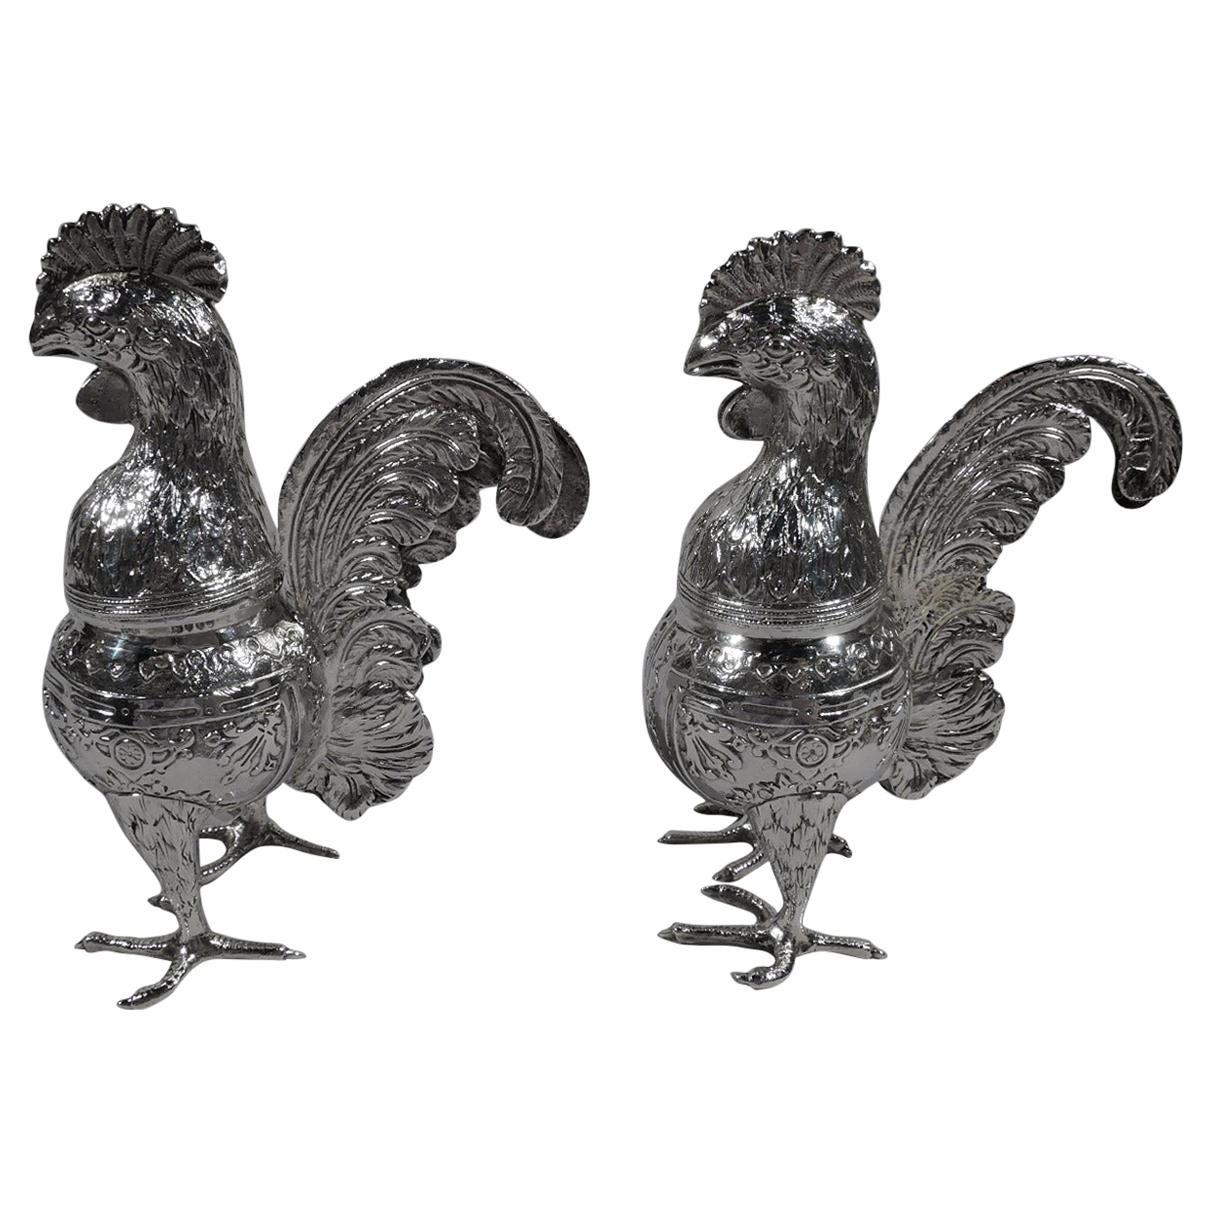 Pair of Unusual and Delightful Sterling Silver Rooster Spice Boxes